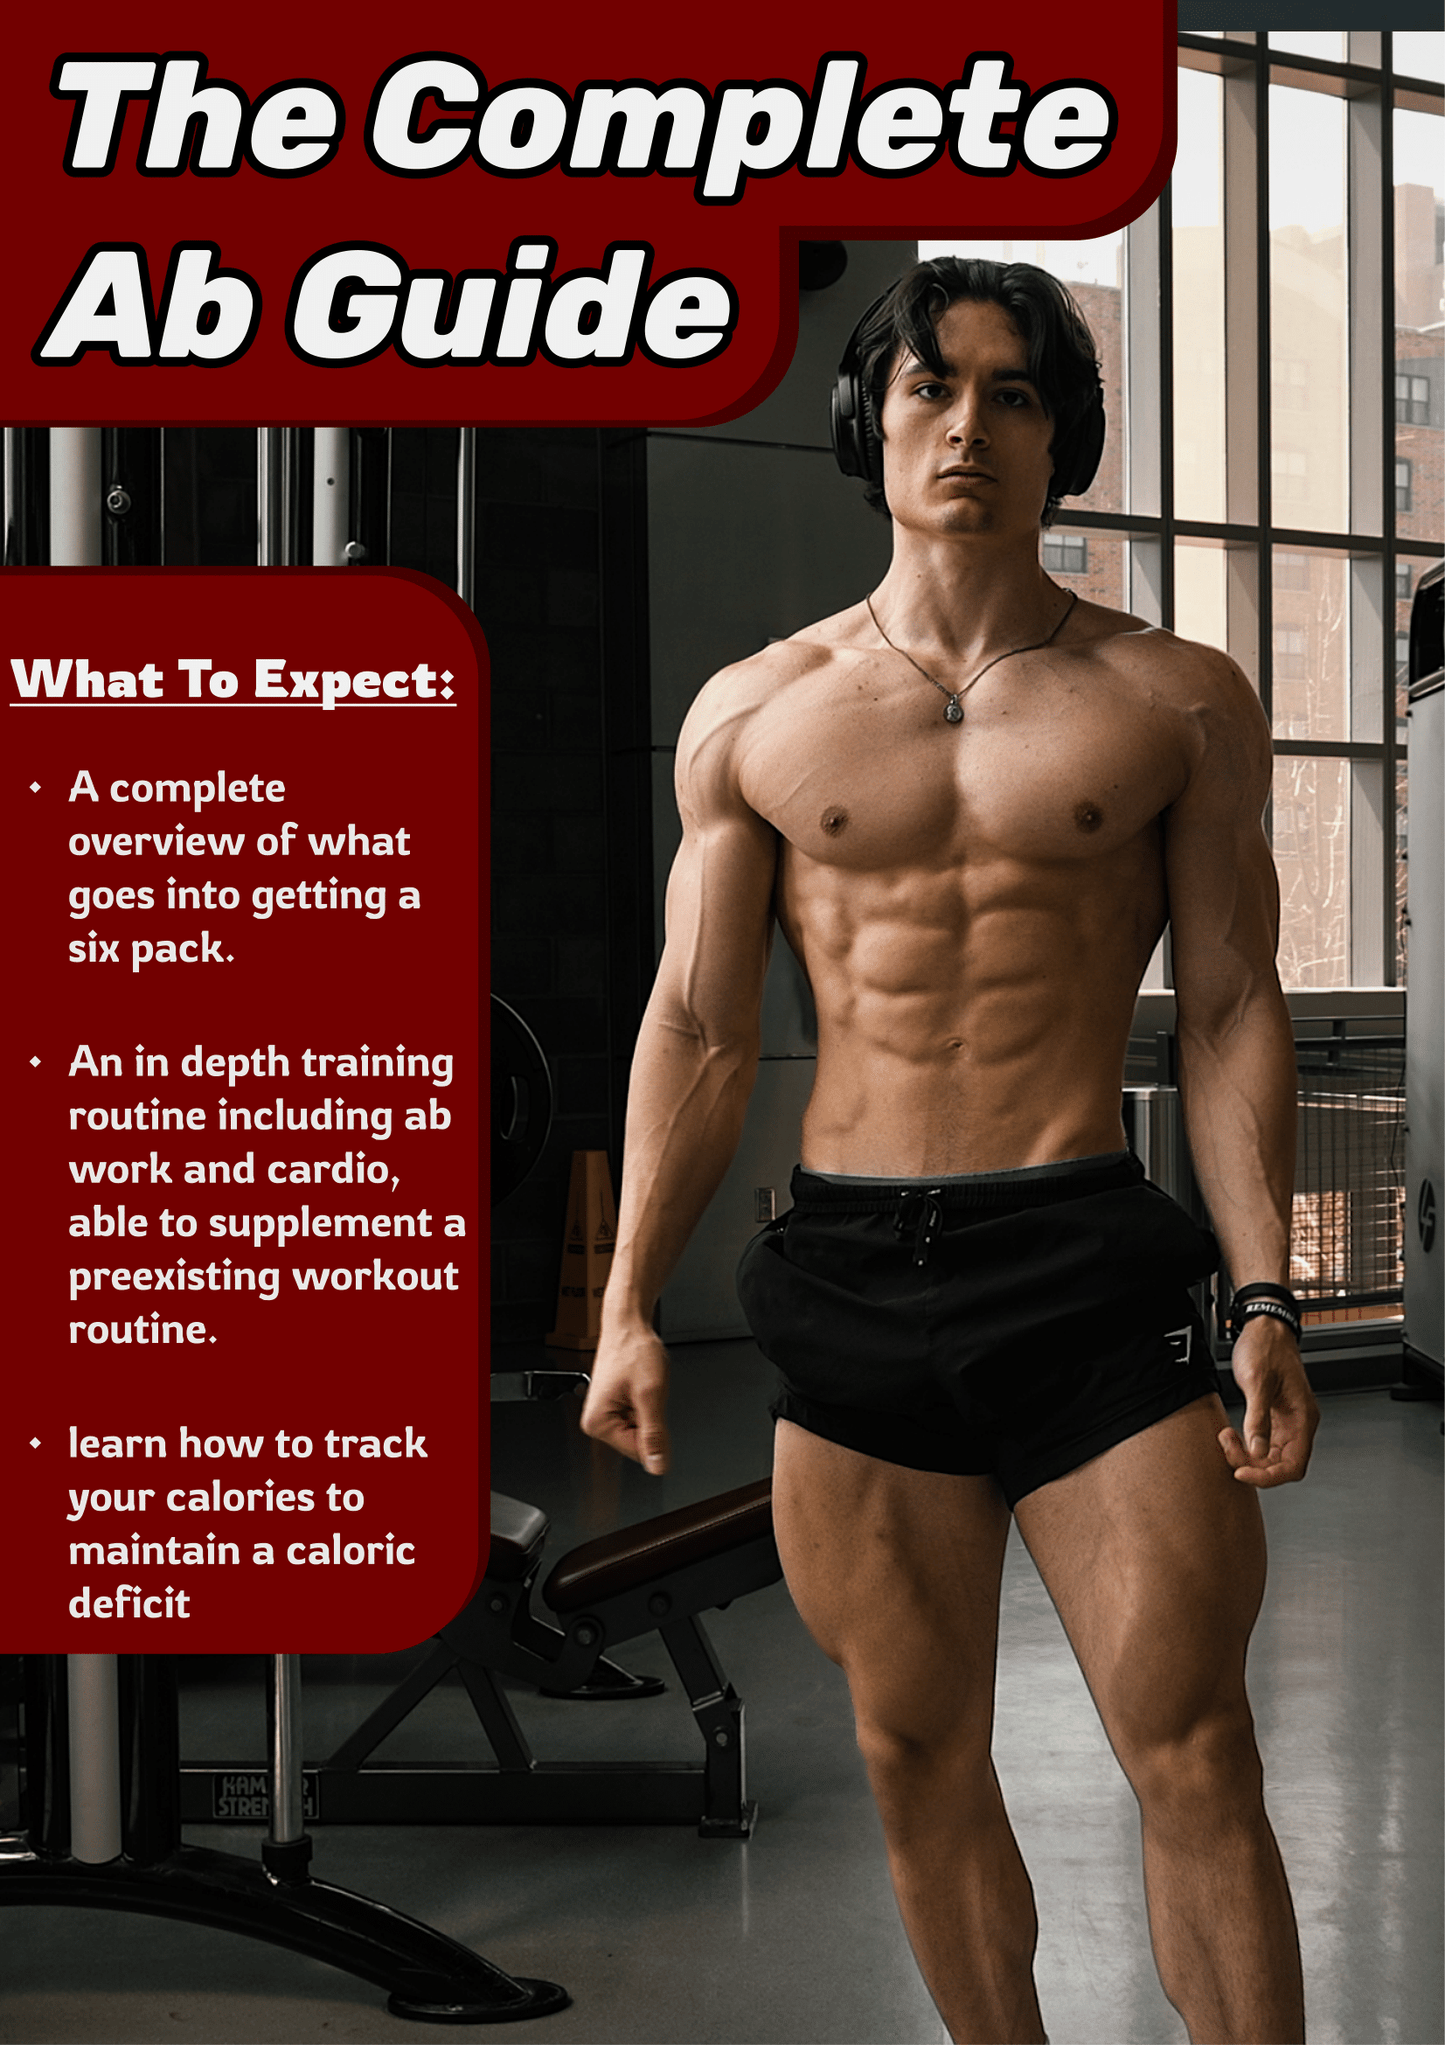 The Complete Ab Guide